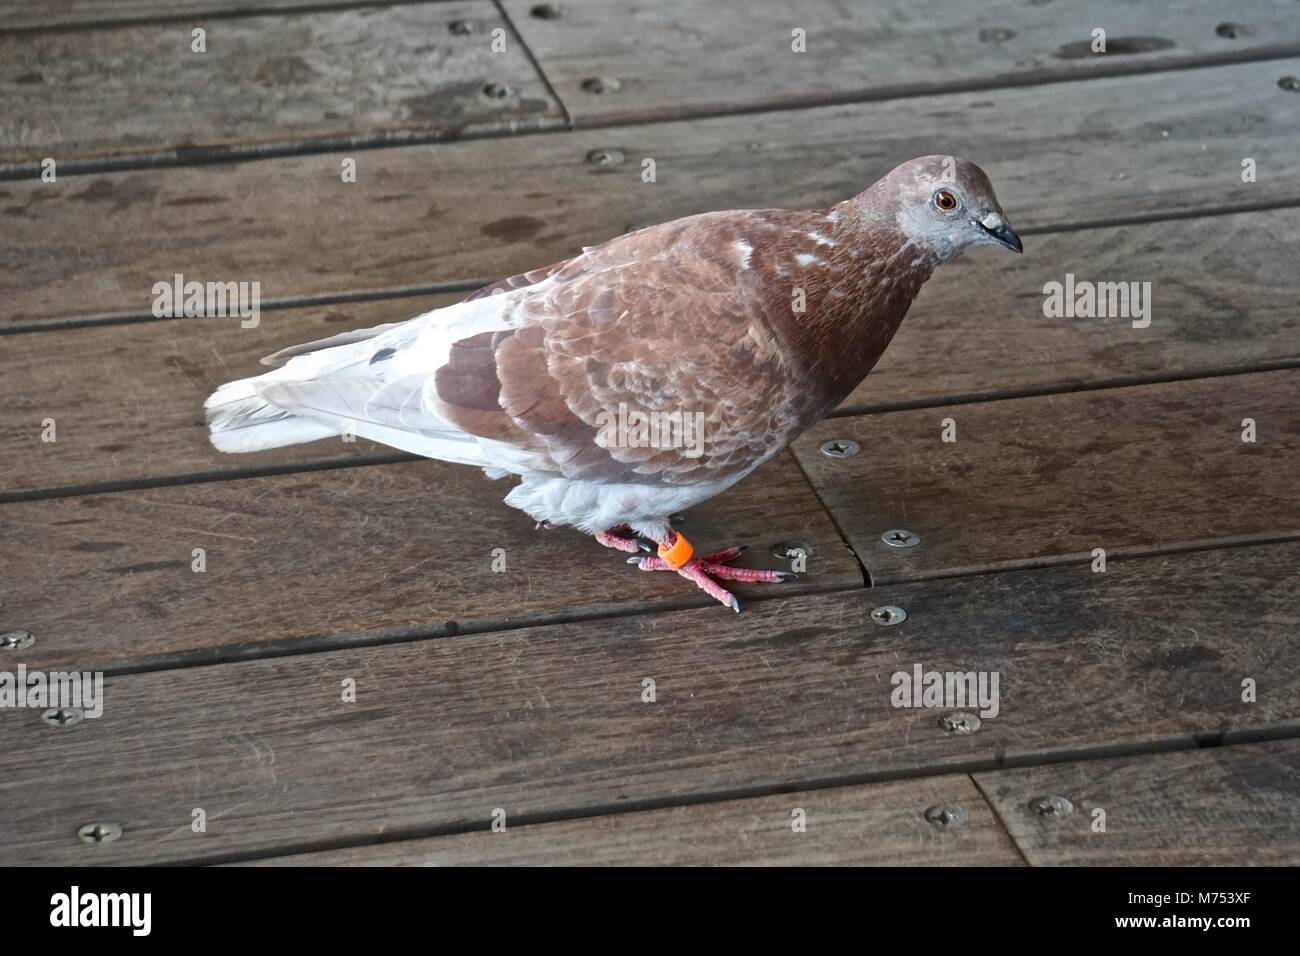 Pigeon tracking